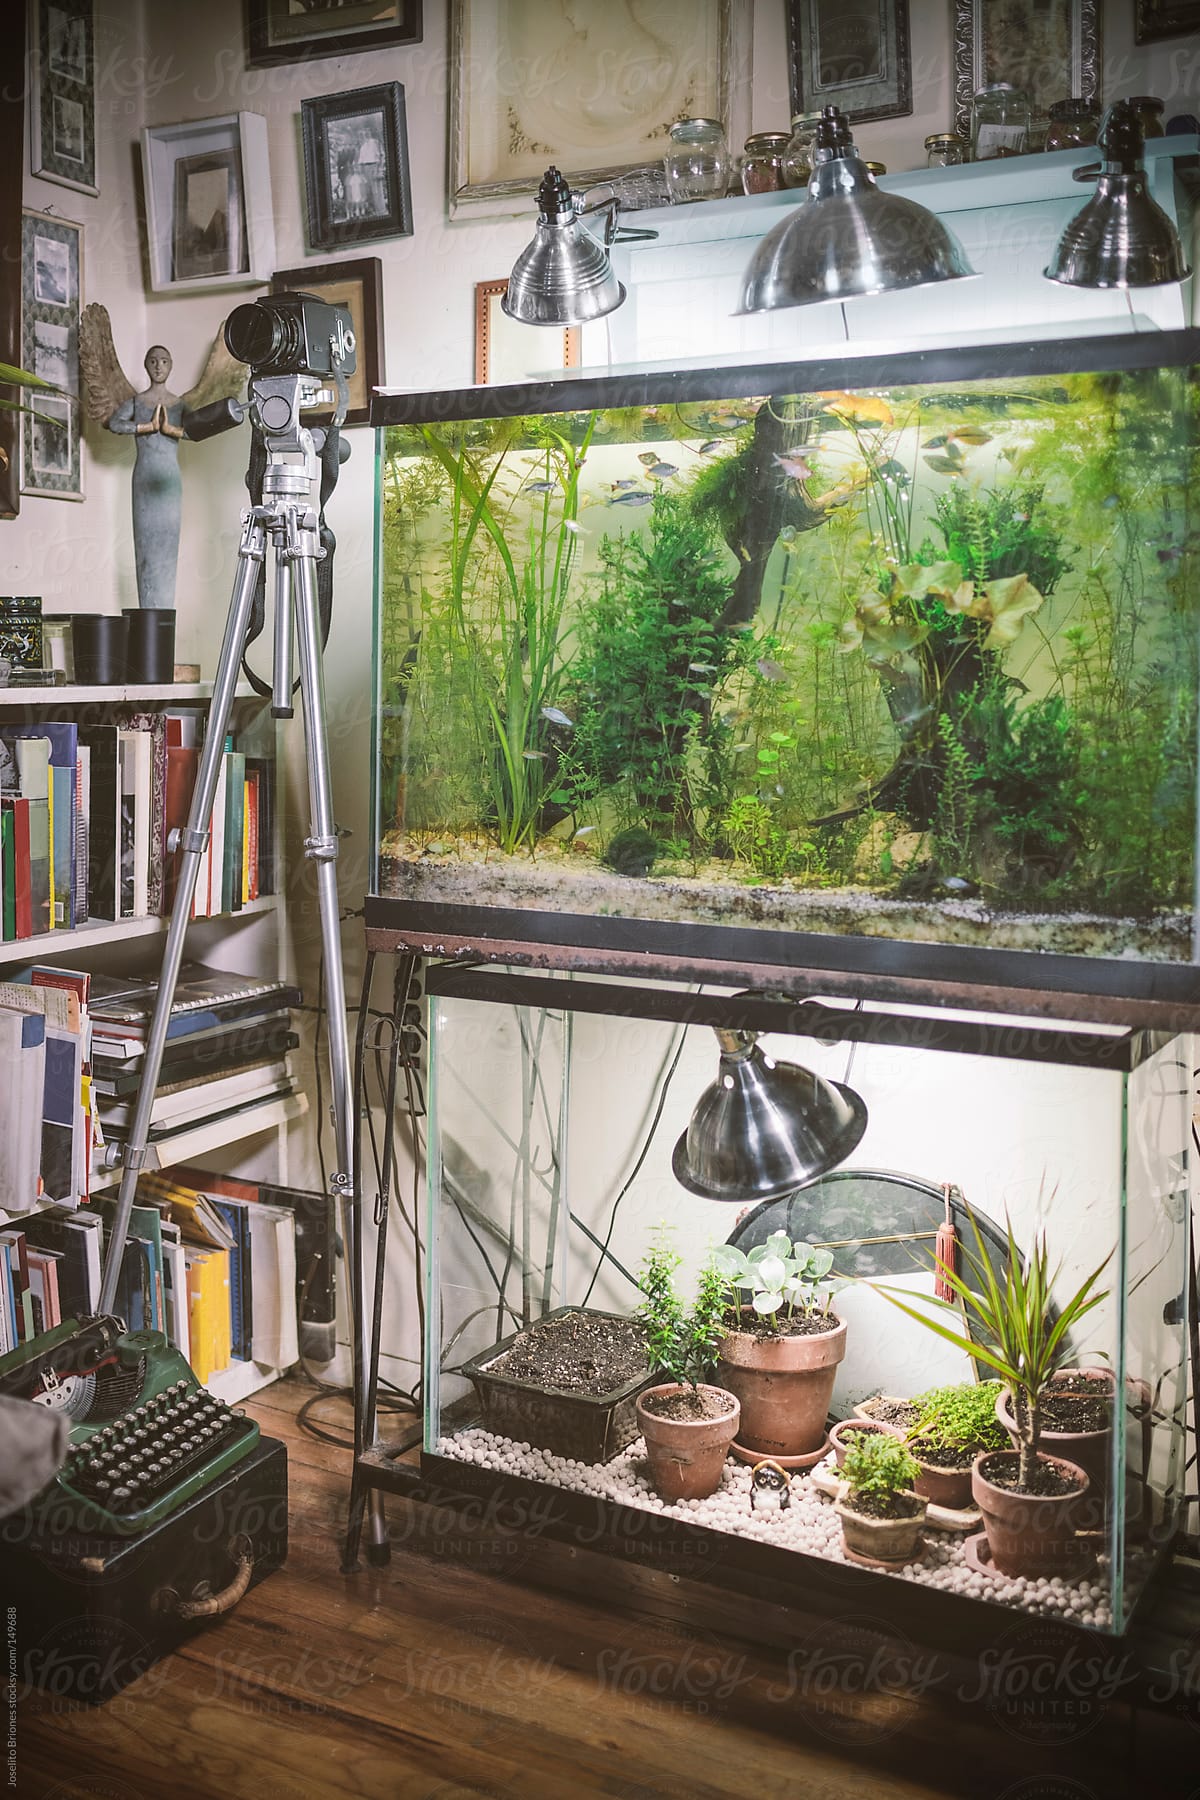 Empty Fish Tank Reuse As Terrarium For Small Plants And Seedlings In Winter" by Stocksy Contributor "Joselito - Stocksy